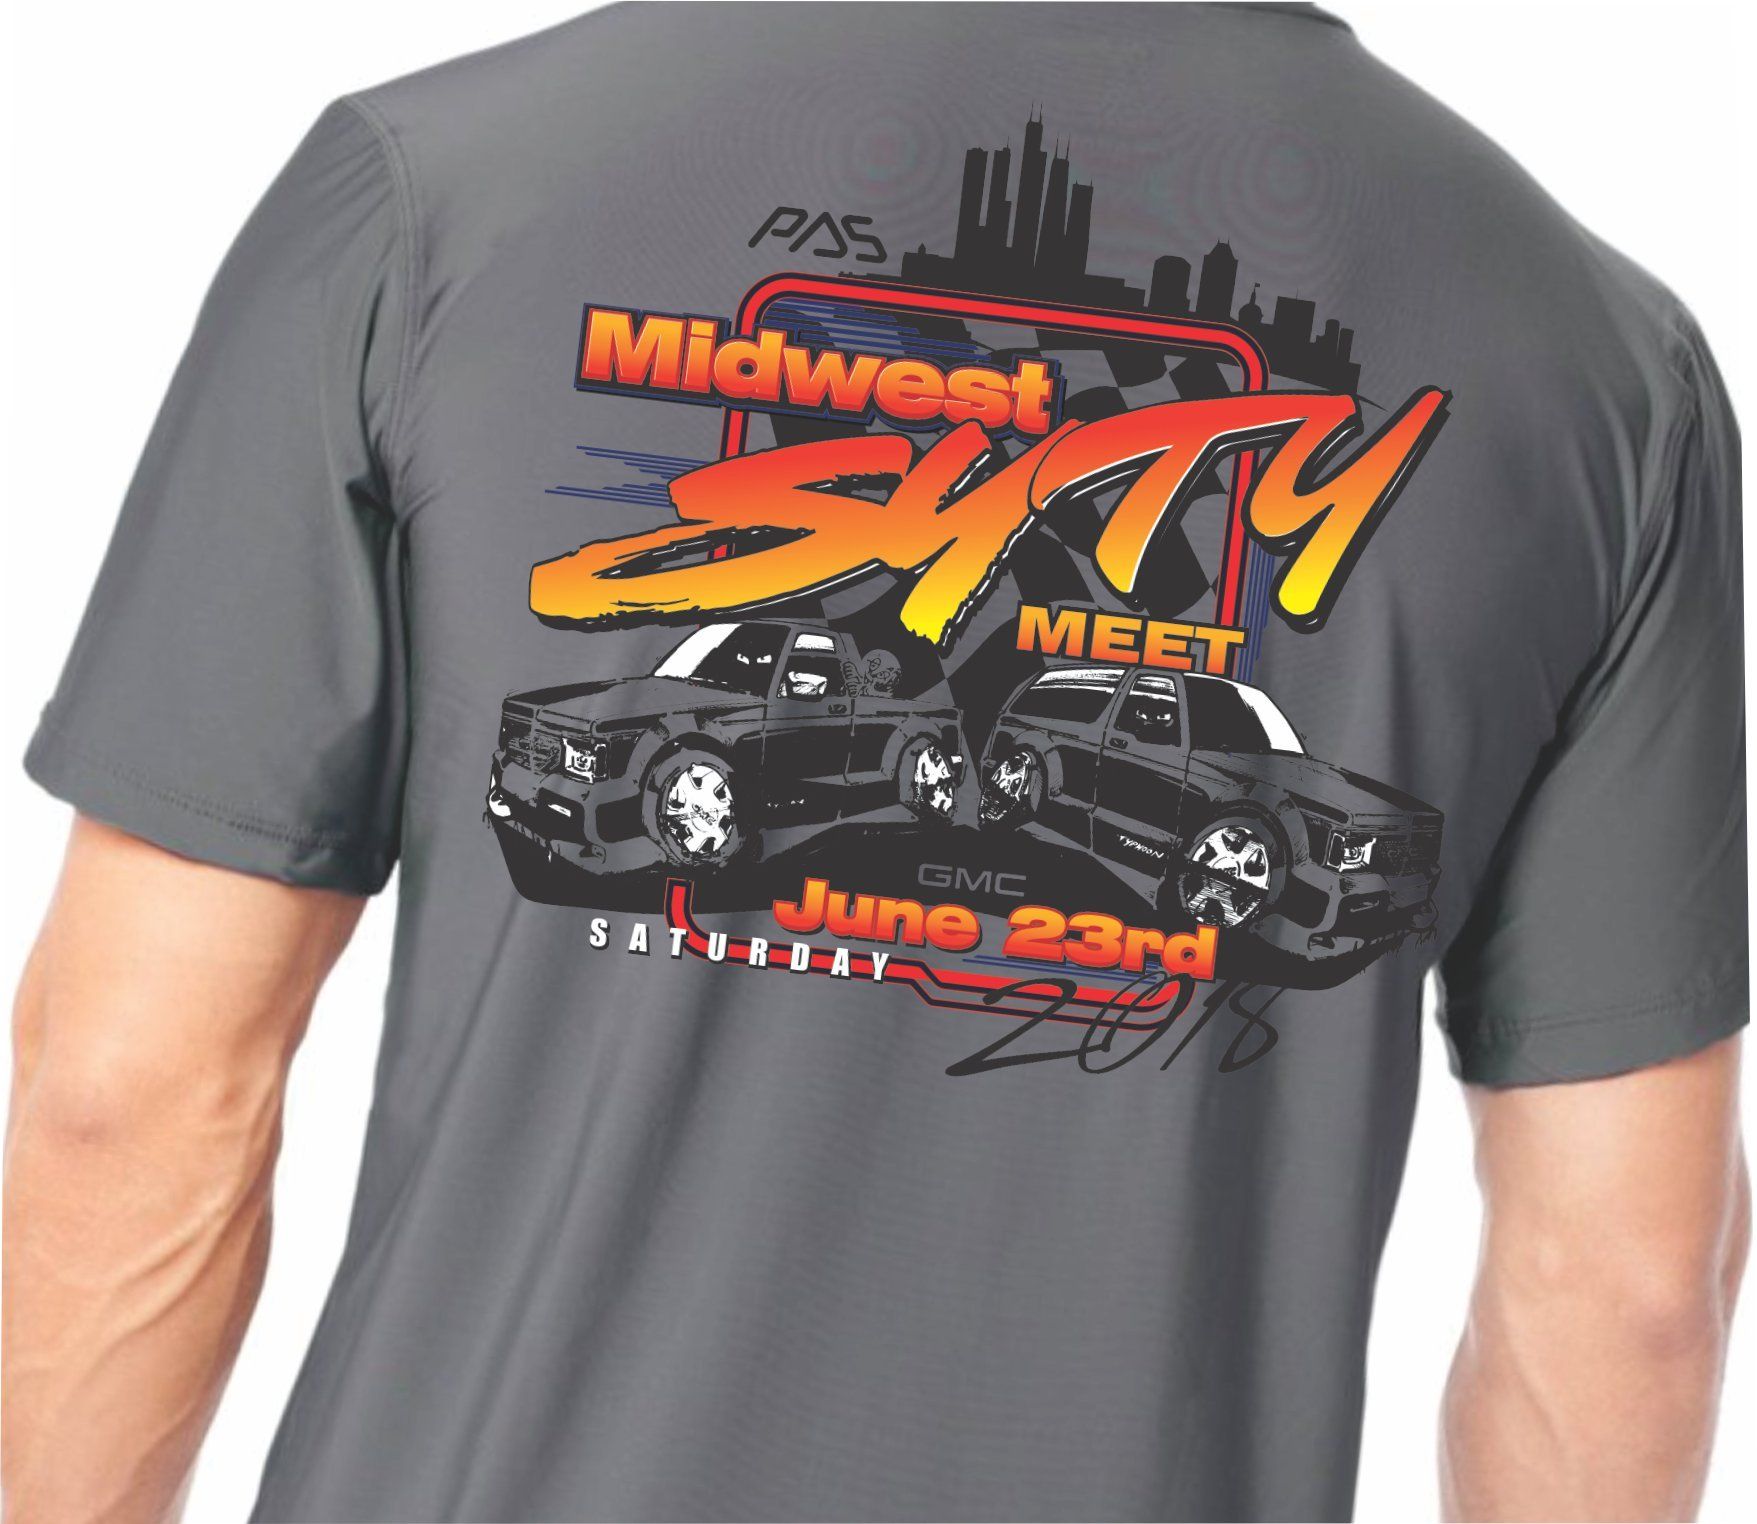 Midwest SyTy event shirt design